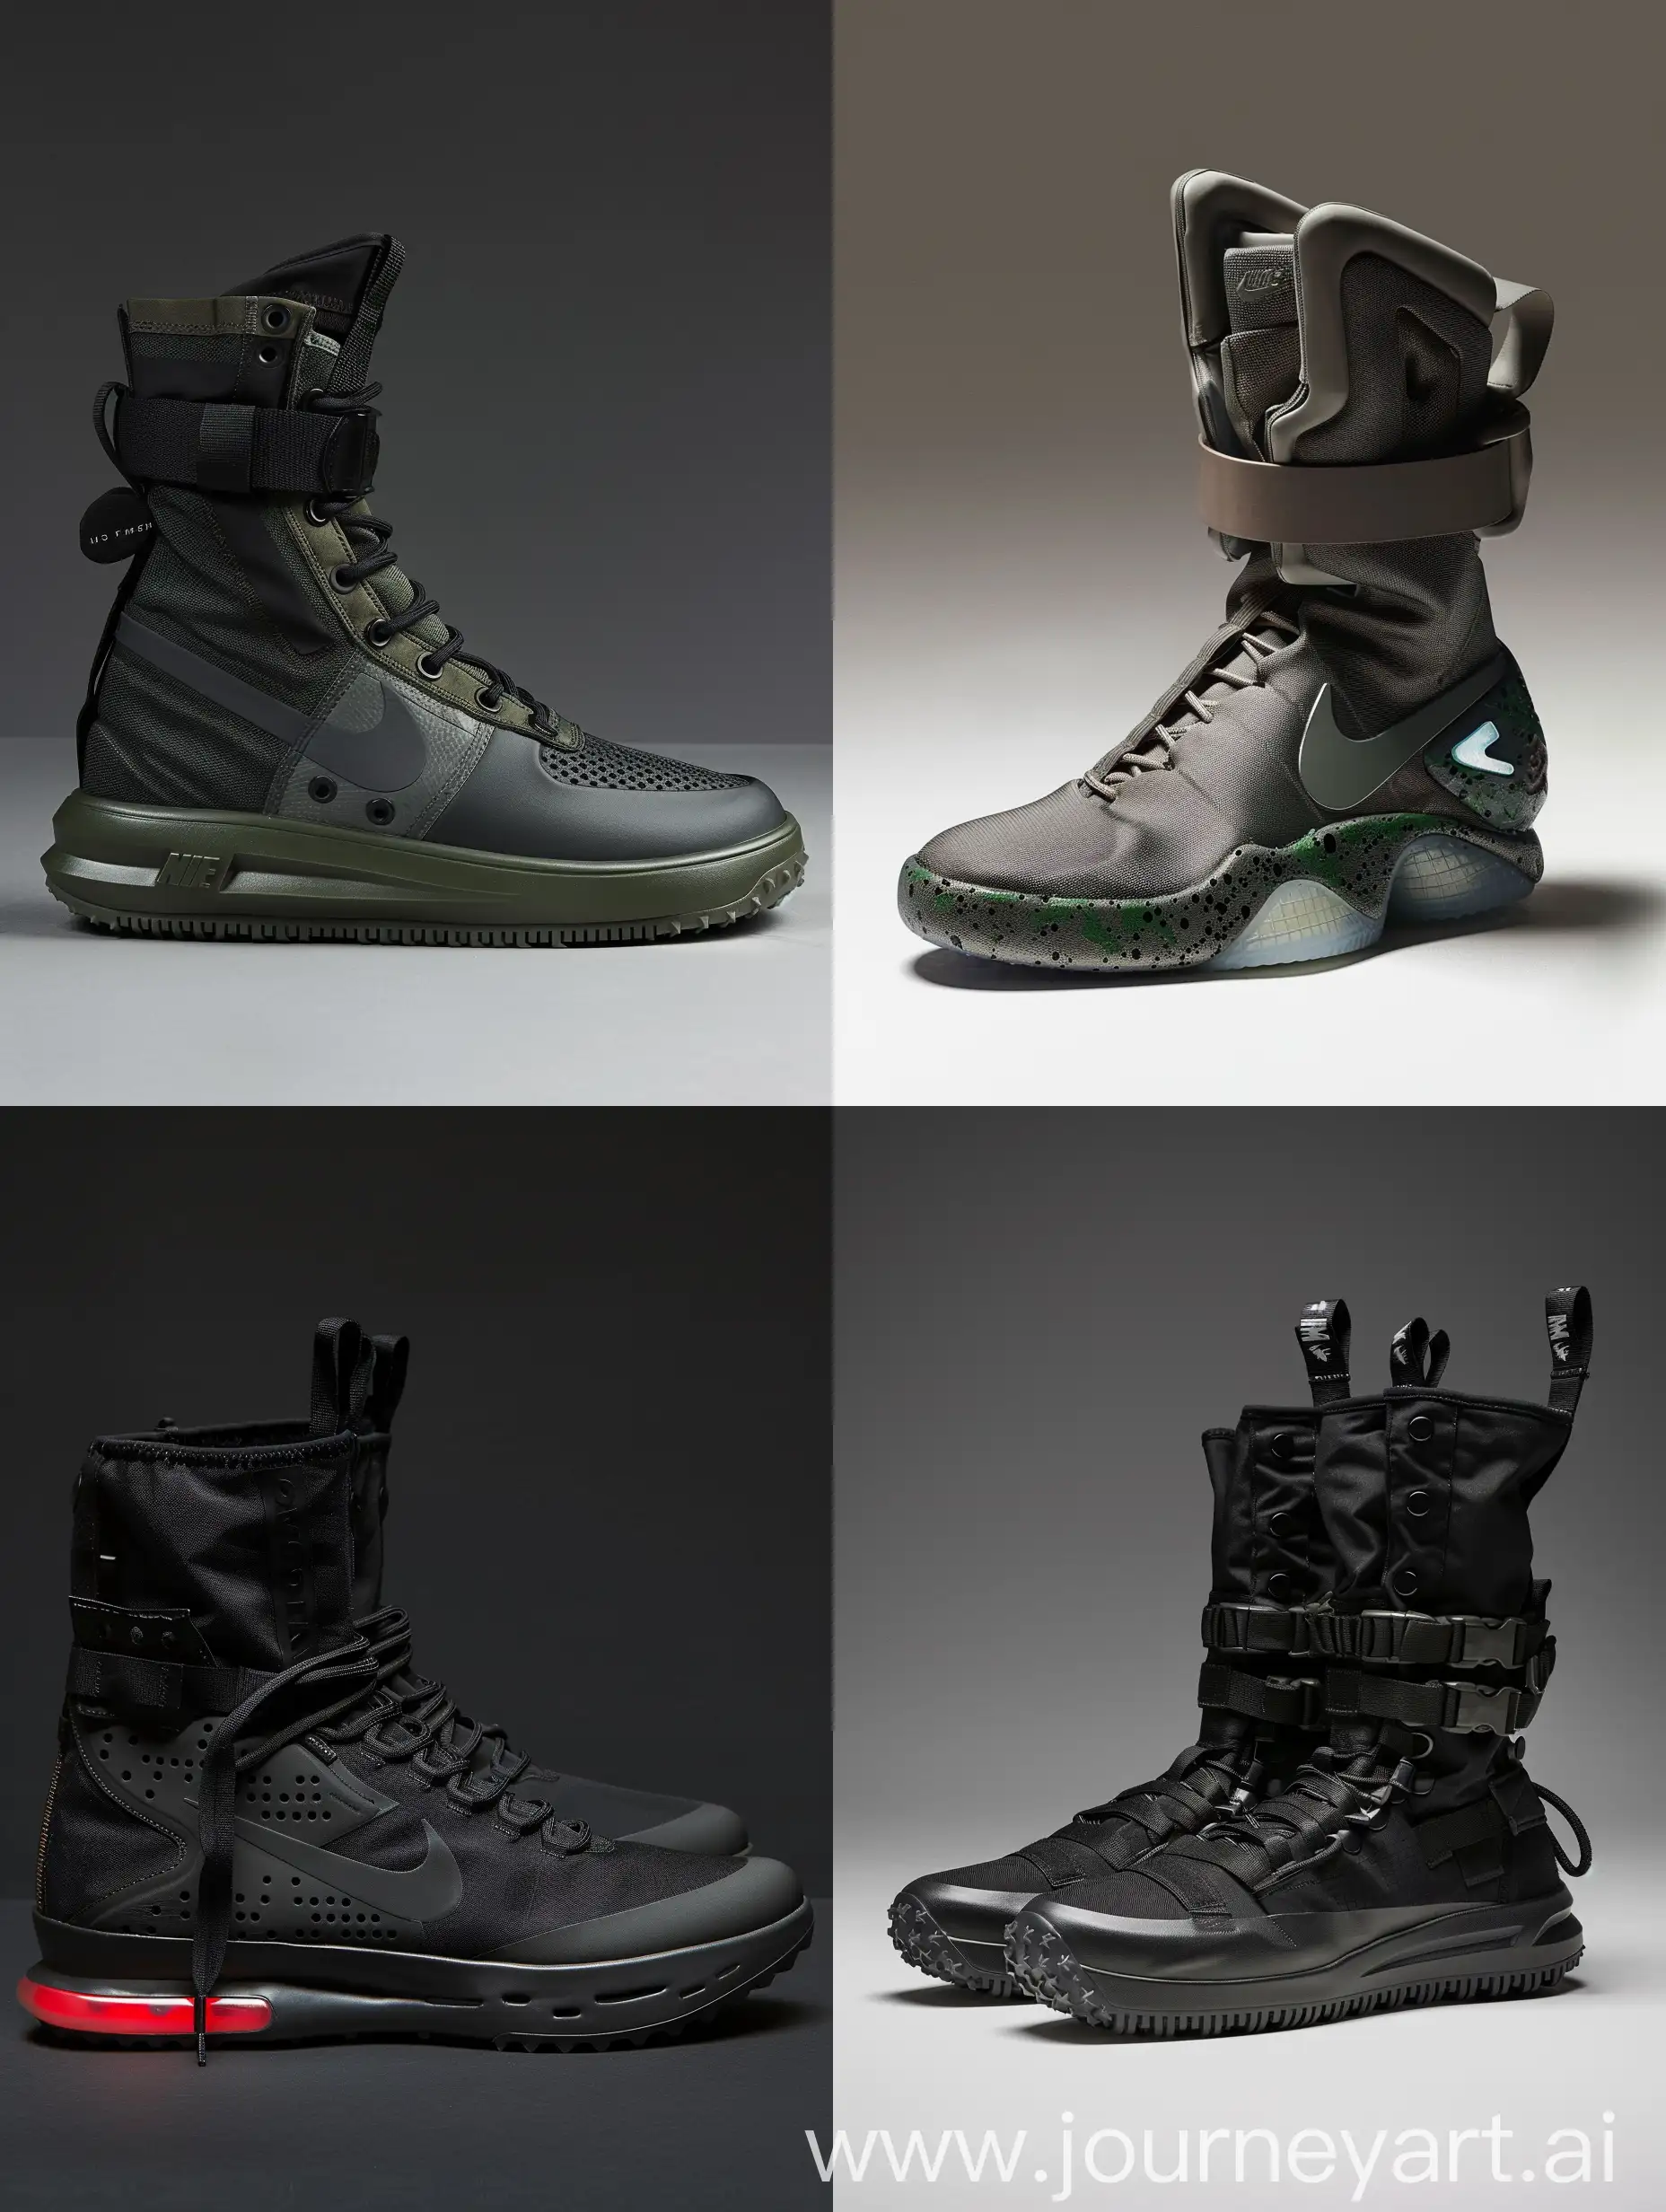 futuristic footwear, inspired by military special forces, by Nike
